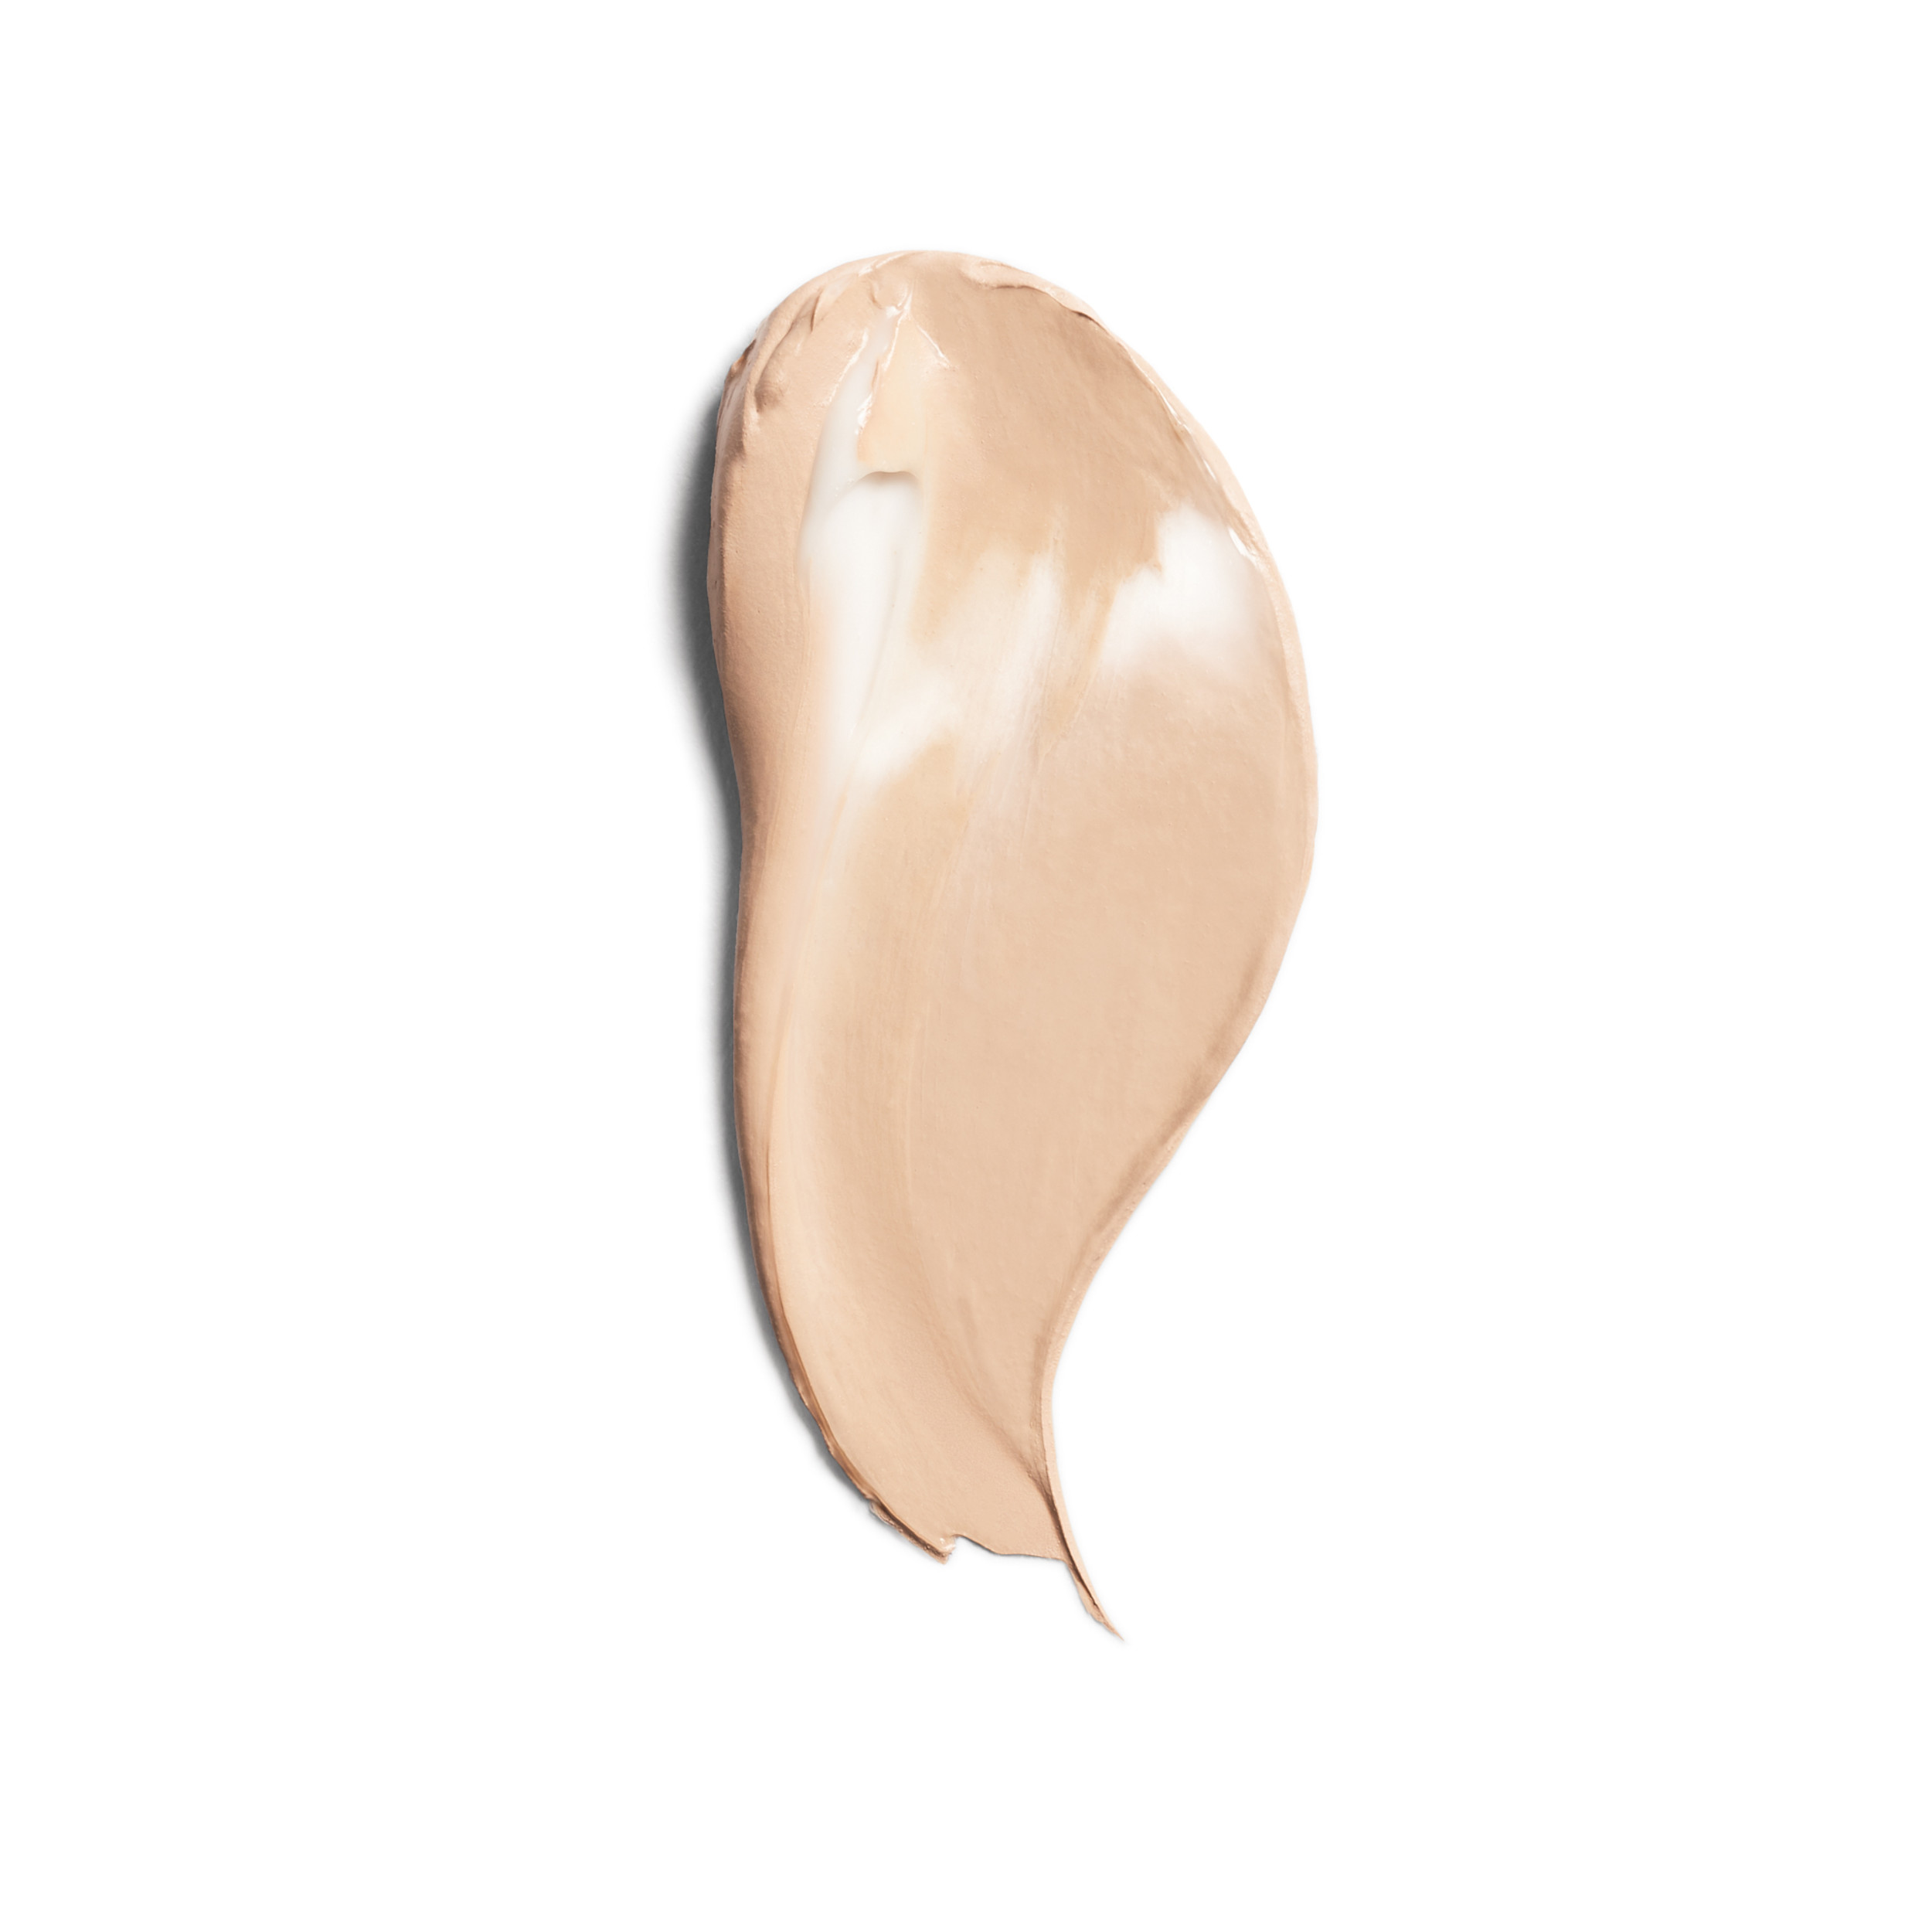 COVERGIRL + OLAY Simply Ageless Instant Wrinkle-Defying Foundation with SPF 28, Classic Beige, 0.44 oz - image 3 of 9